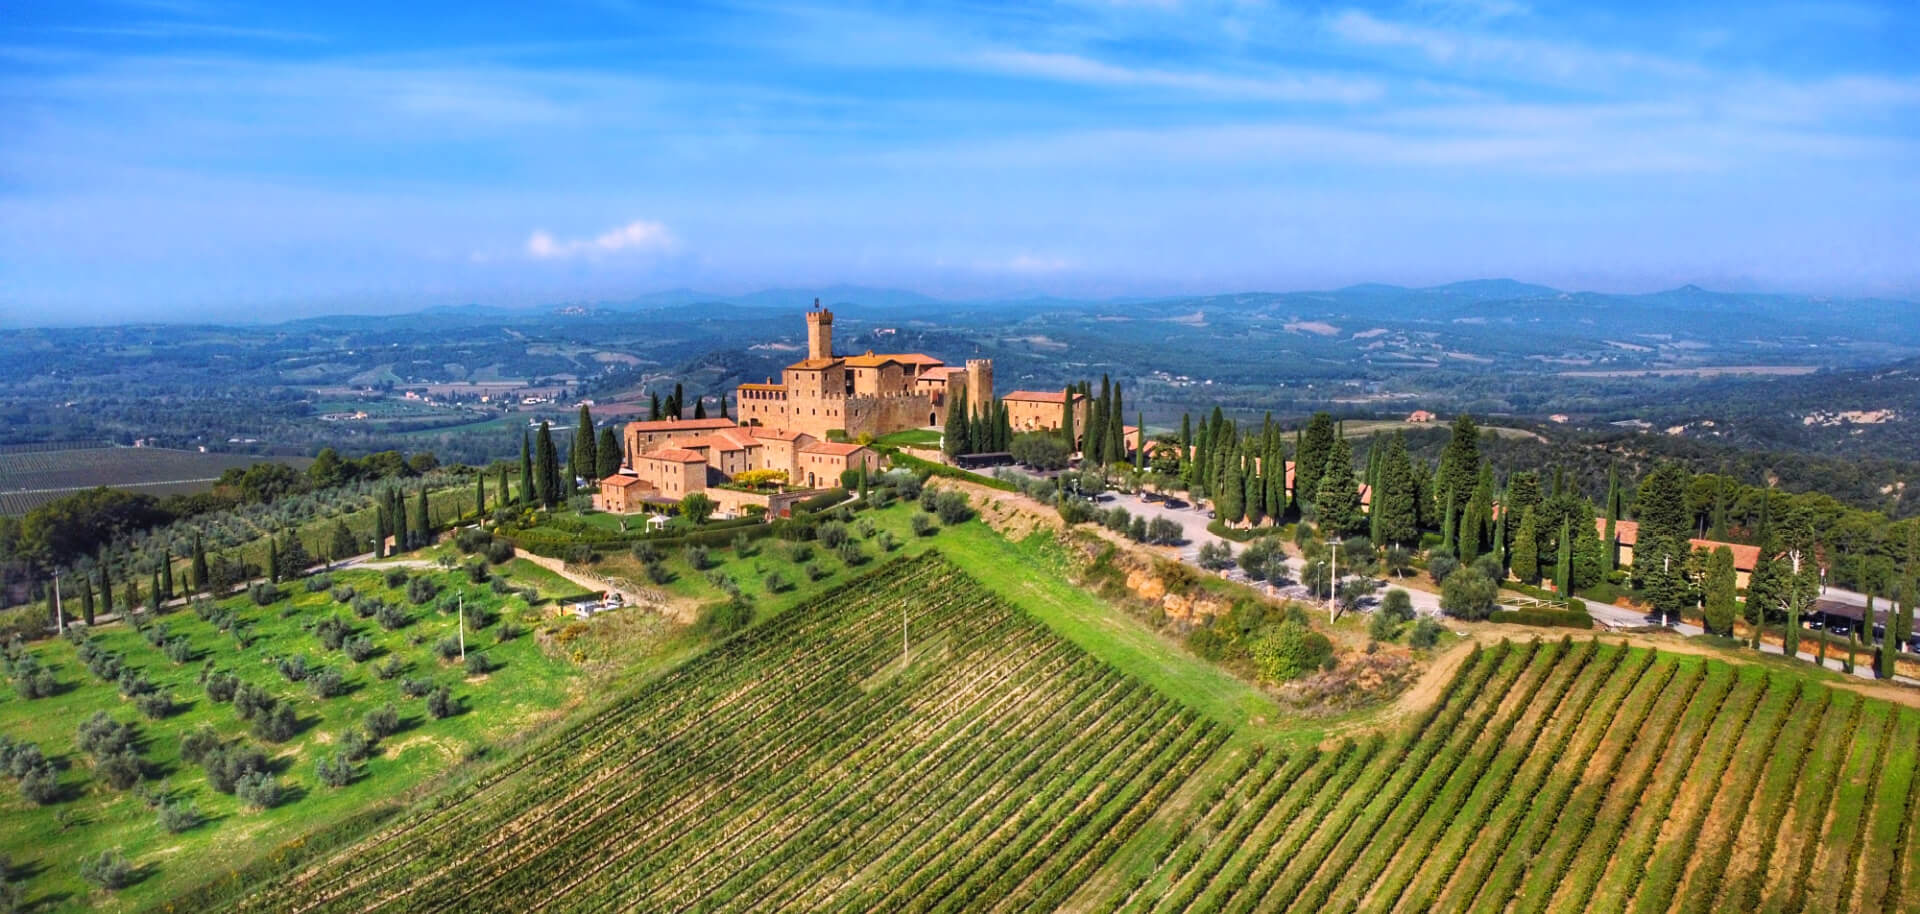 Castello Banfi Tuscany Castles and Wine Tour from Rome